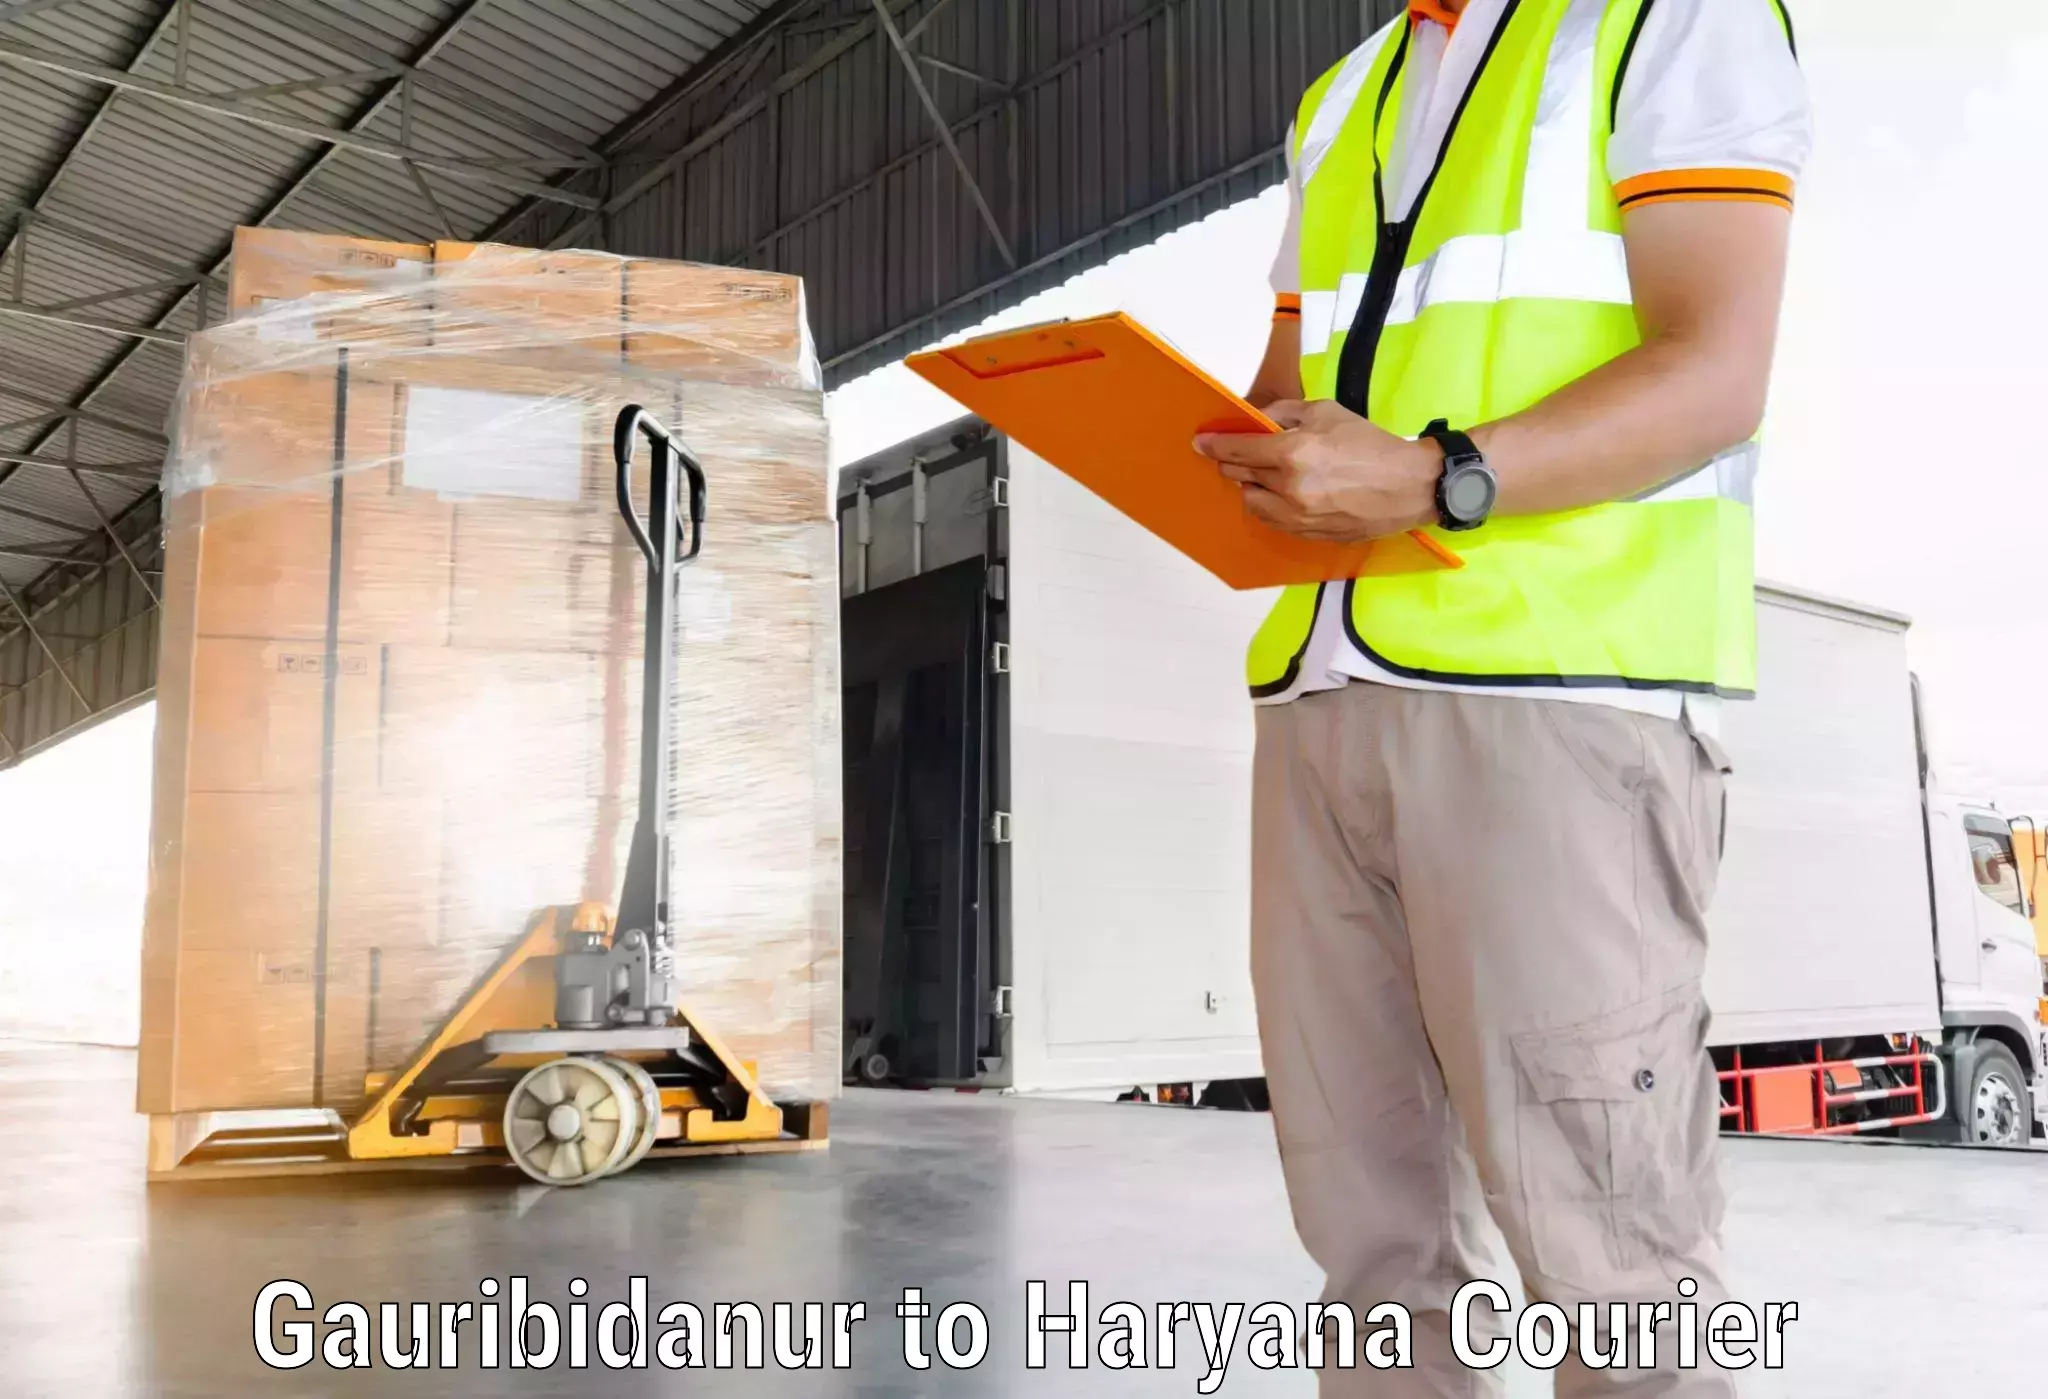 Sustainable shipping practices Gauribidanur to Panipat